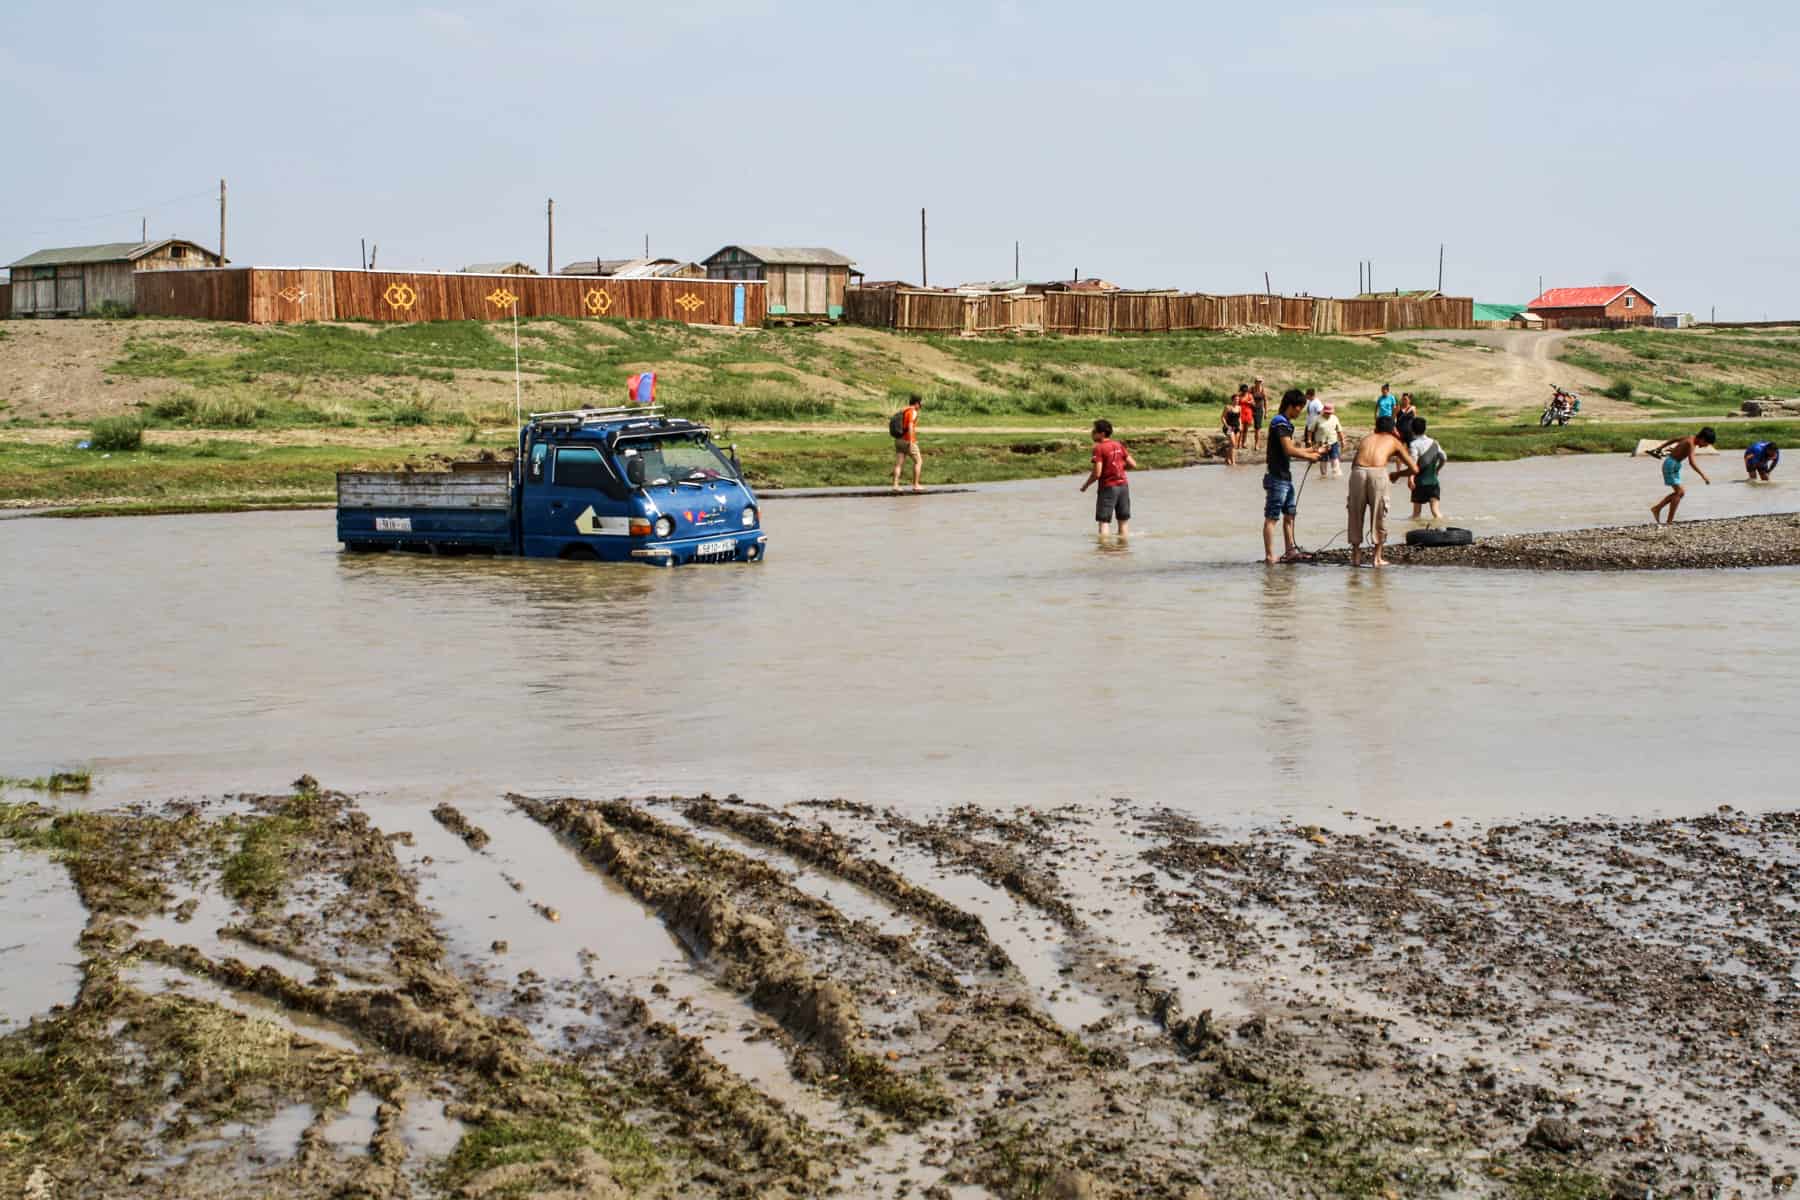 A blue truck is stuck in a pool of water in Mongolia as a group of people try to help